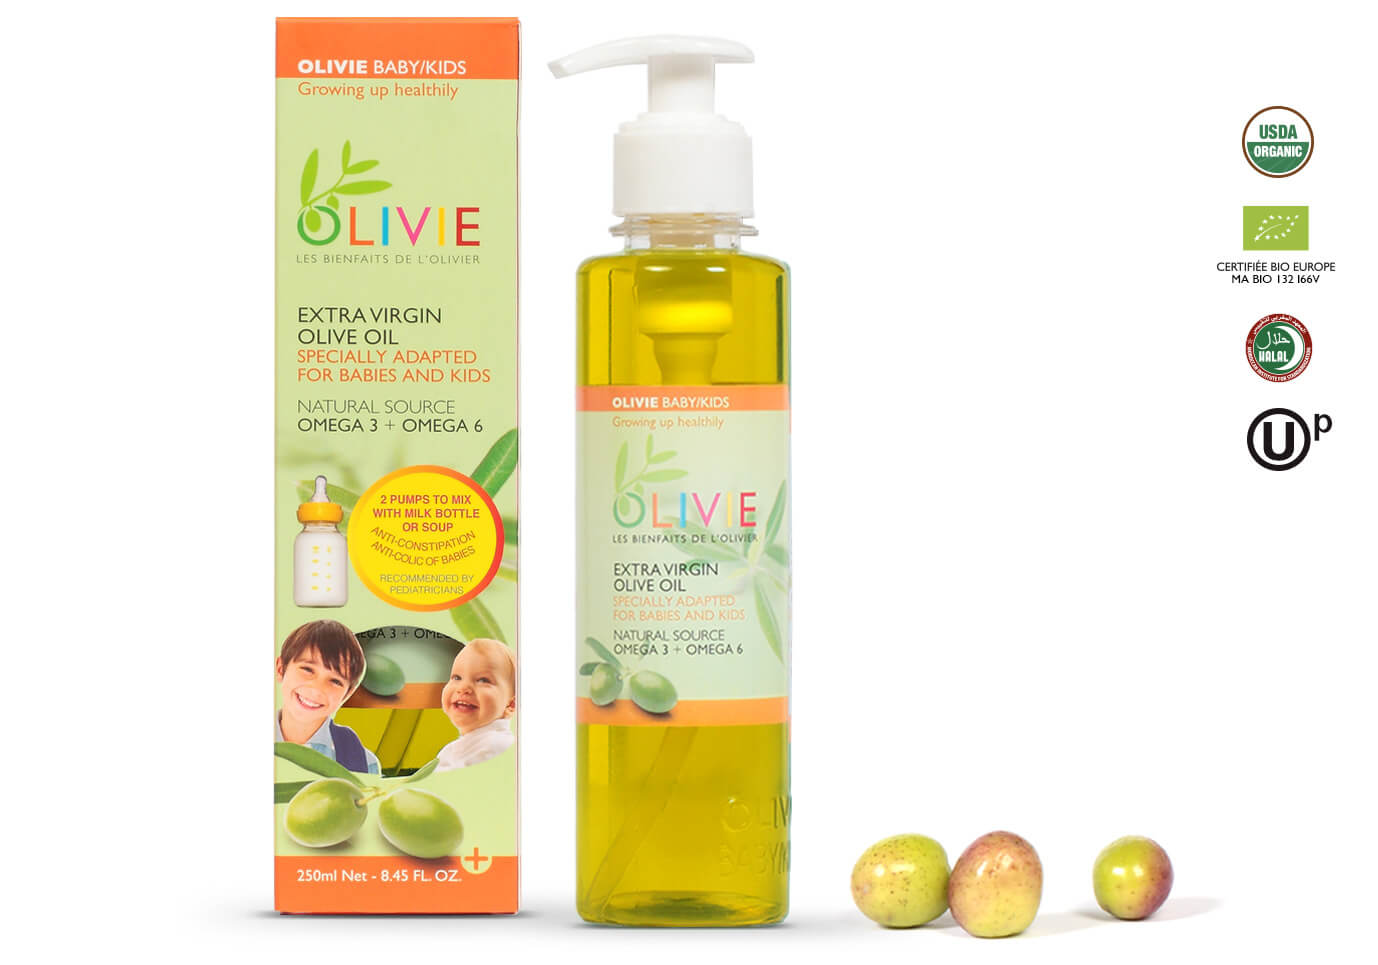 OLIVIE BABY/KIDS reduces babies colic and constipation and improves bones development and growth.